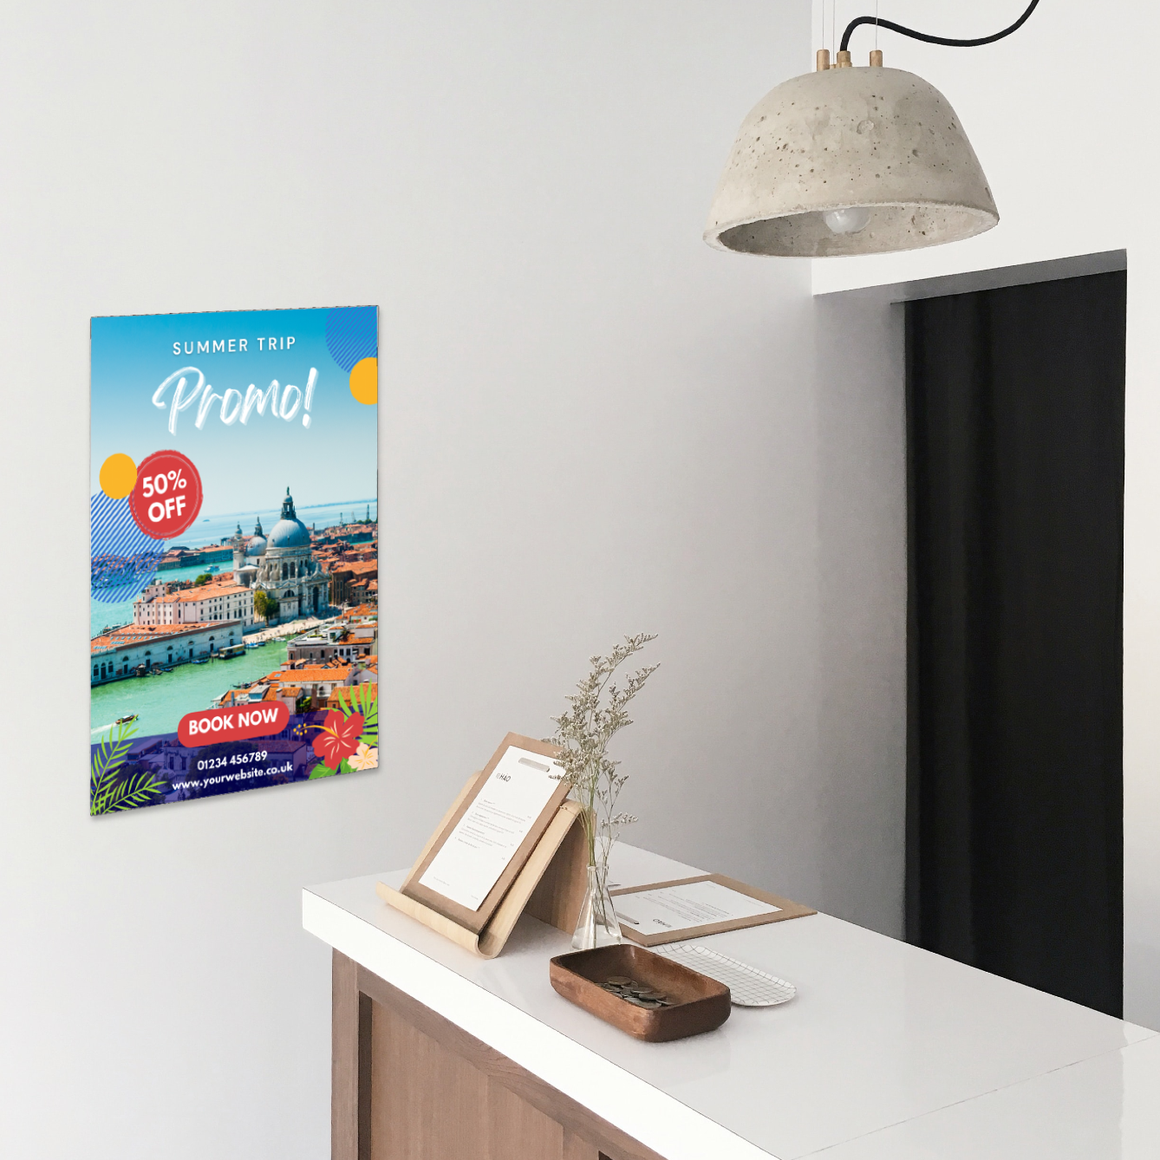 Adhesive Poster Holder C-Pocket on Wall with Holiday Poster